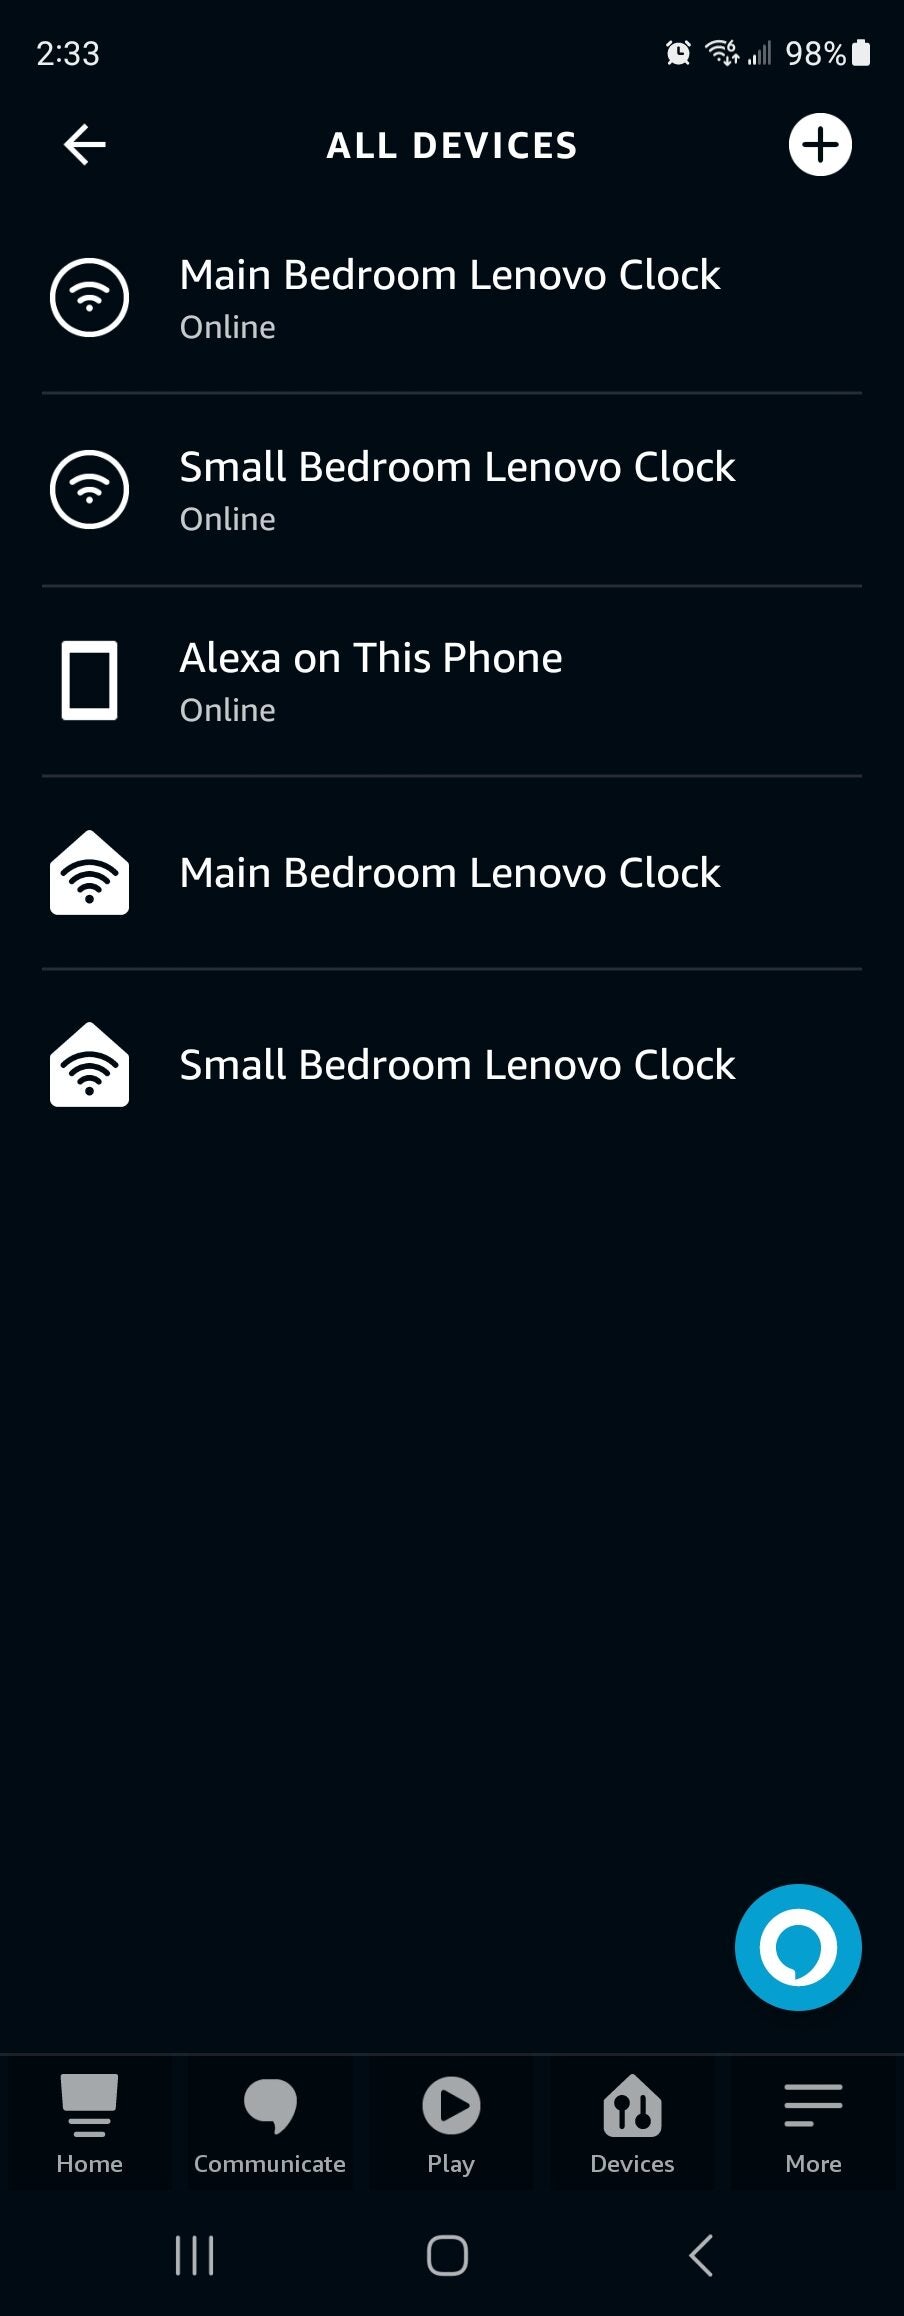 Best Buy] Lenovo Smart Clock Essential with Alexa - Misty Blue & Clay Red  $ - Page 5  Forums